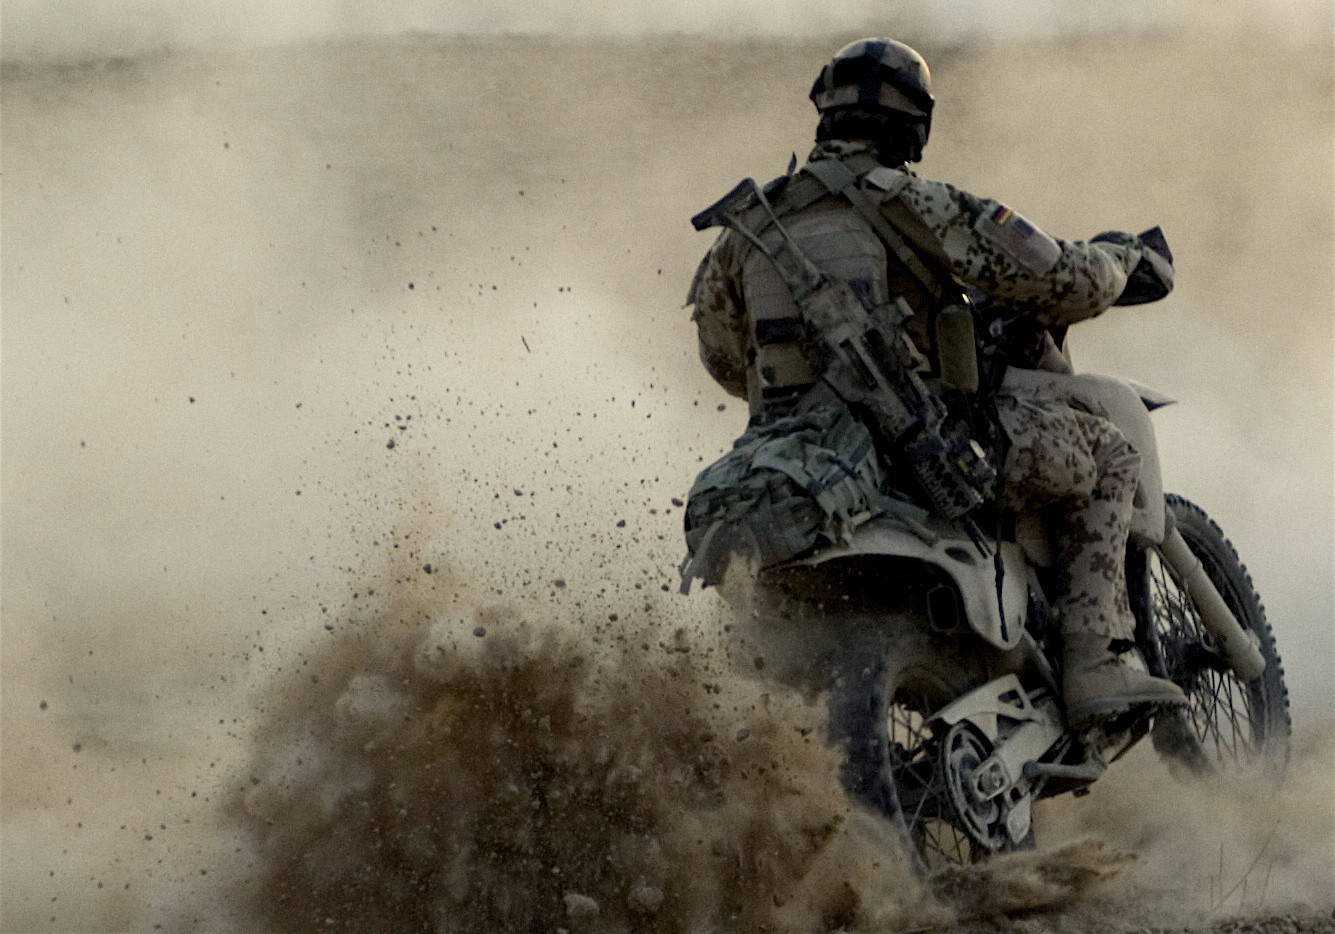 ksk wallpaper,soldier,military,army,vehicle,all terrain vehicle